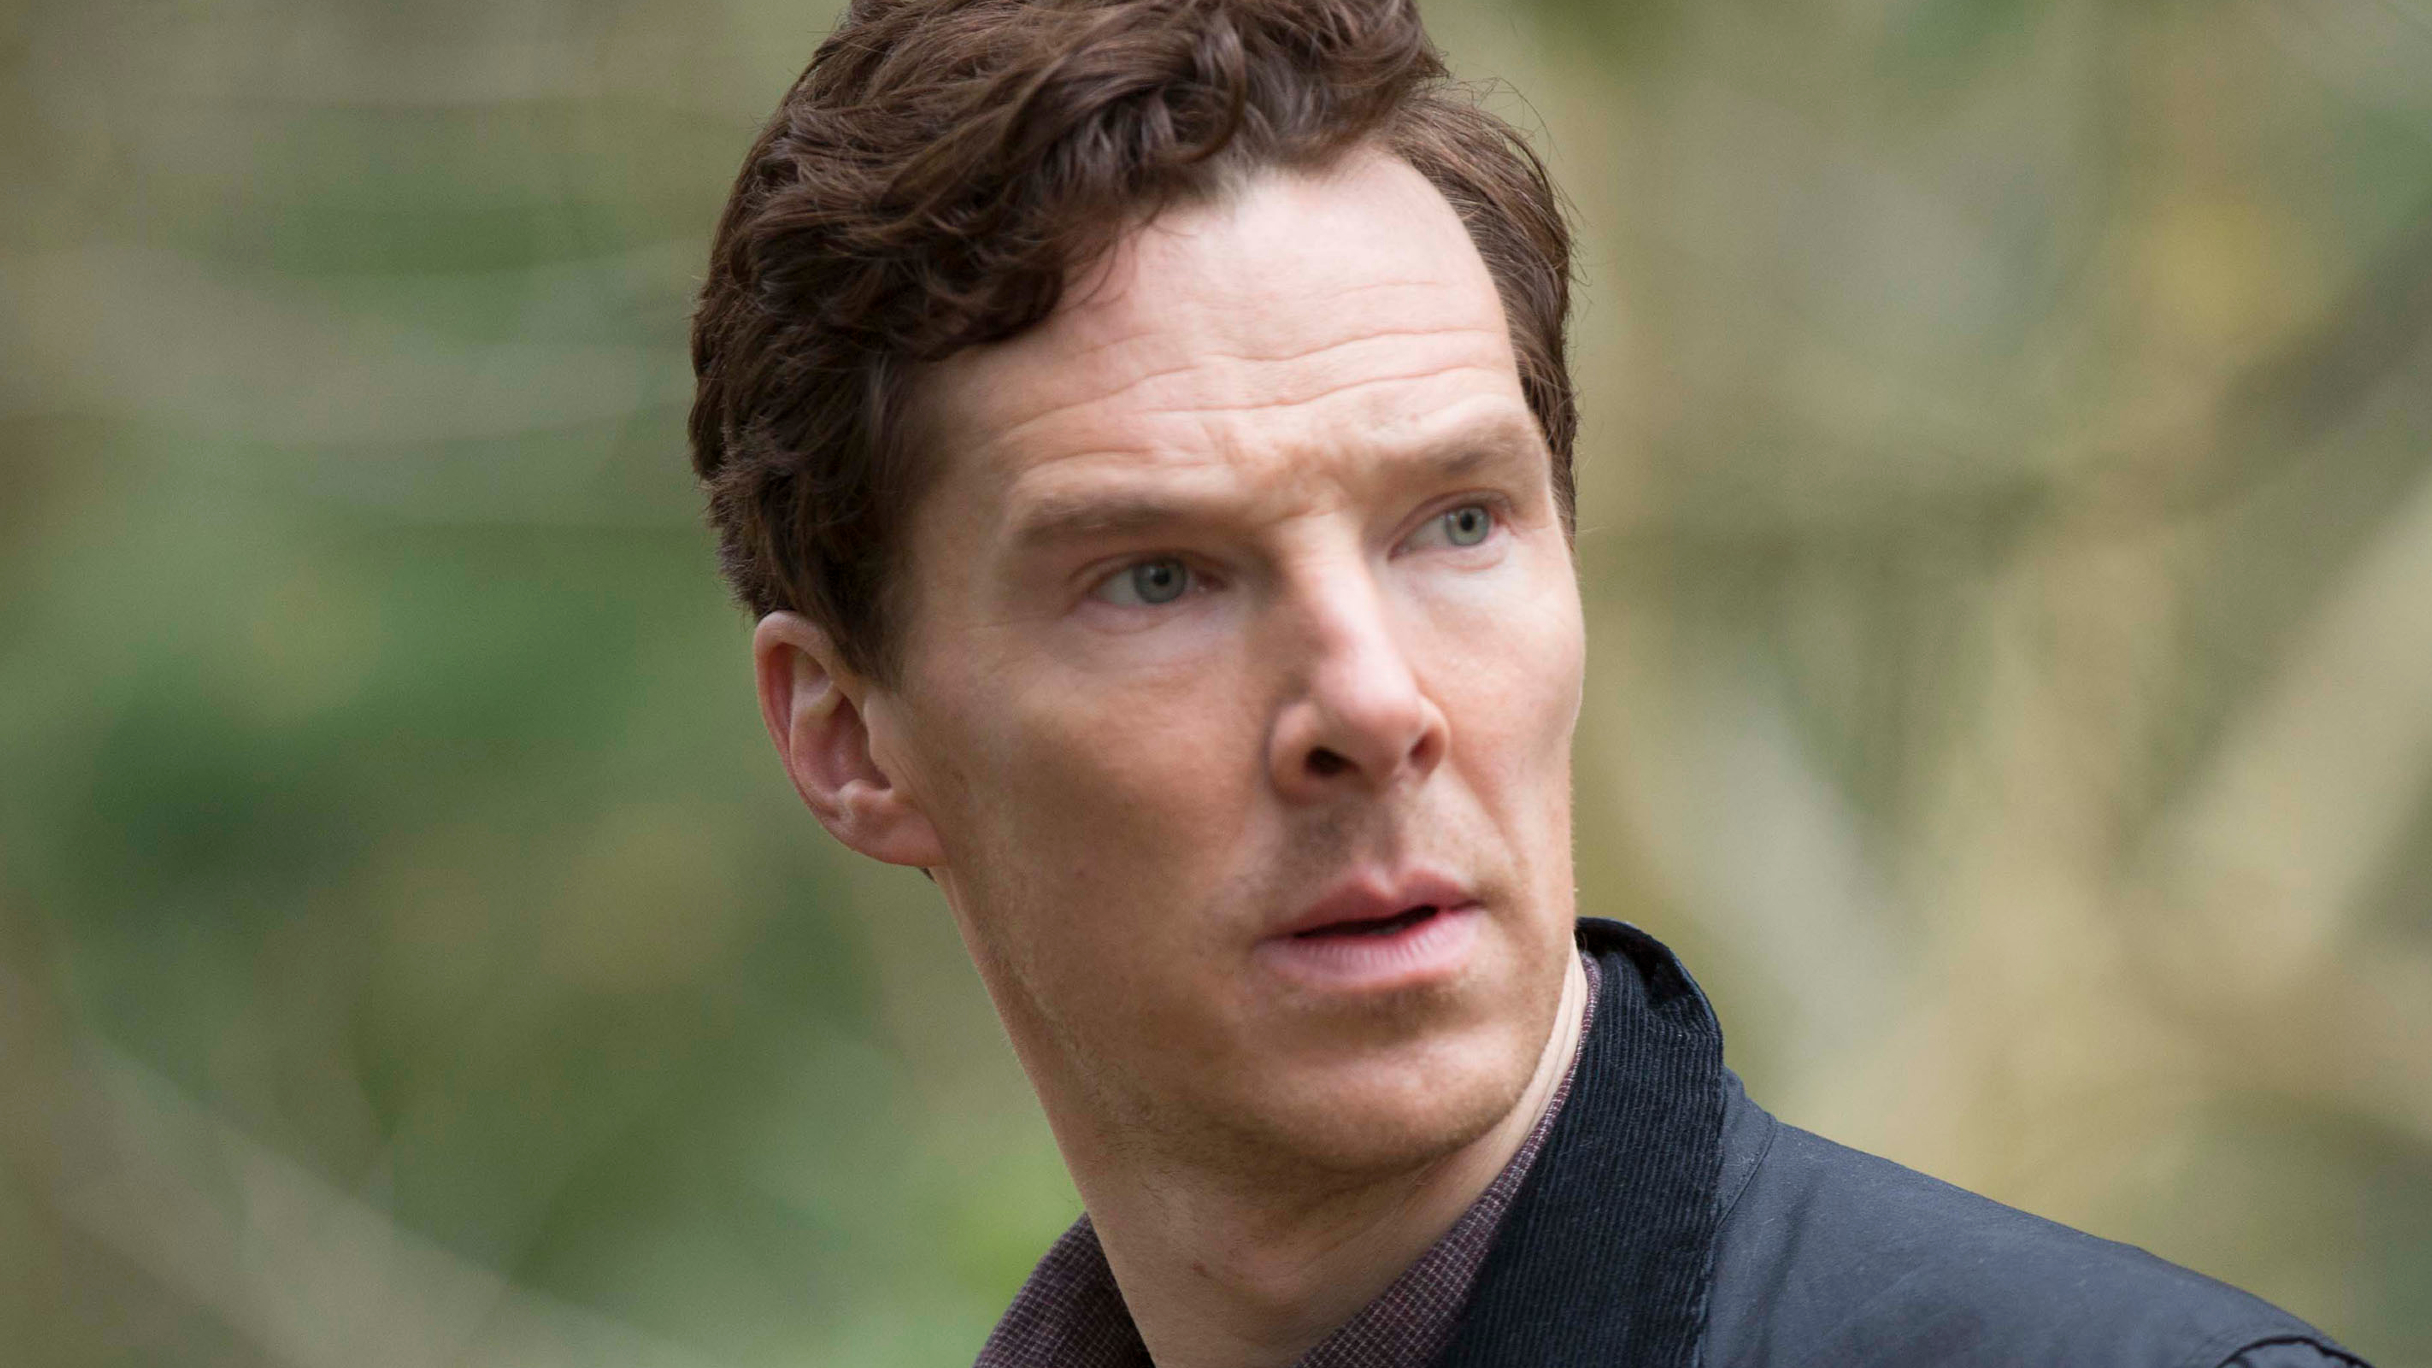 Benedict Cumberbatch Has One Of The Most Watched New Movies On Streaming